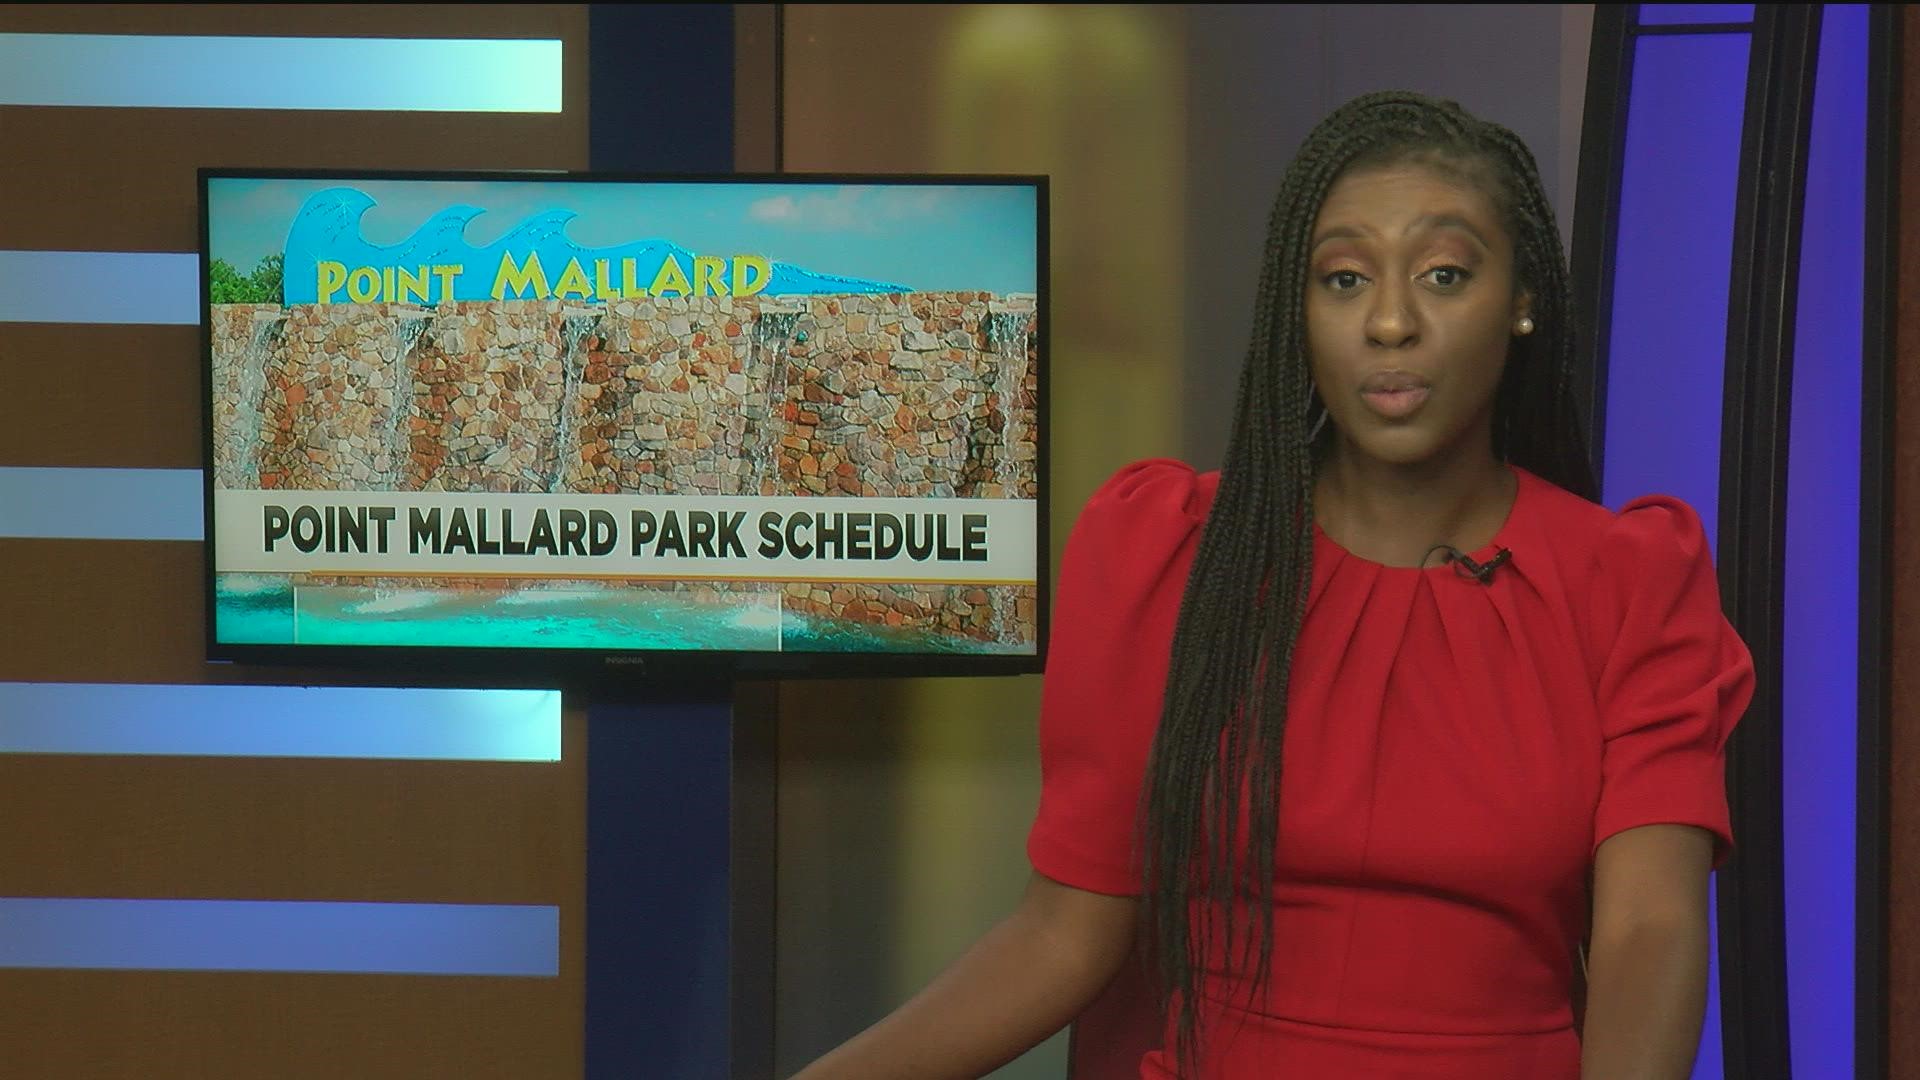 Point Mallard Water Park announced on Thursday that starting July 31, it will begin weekend-only operations after "unforeseen staffing impacts."